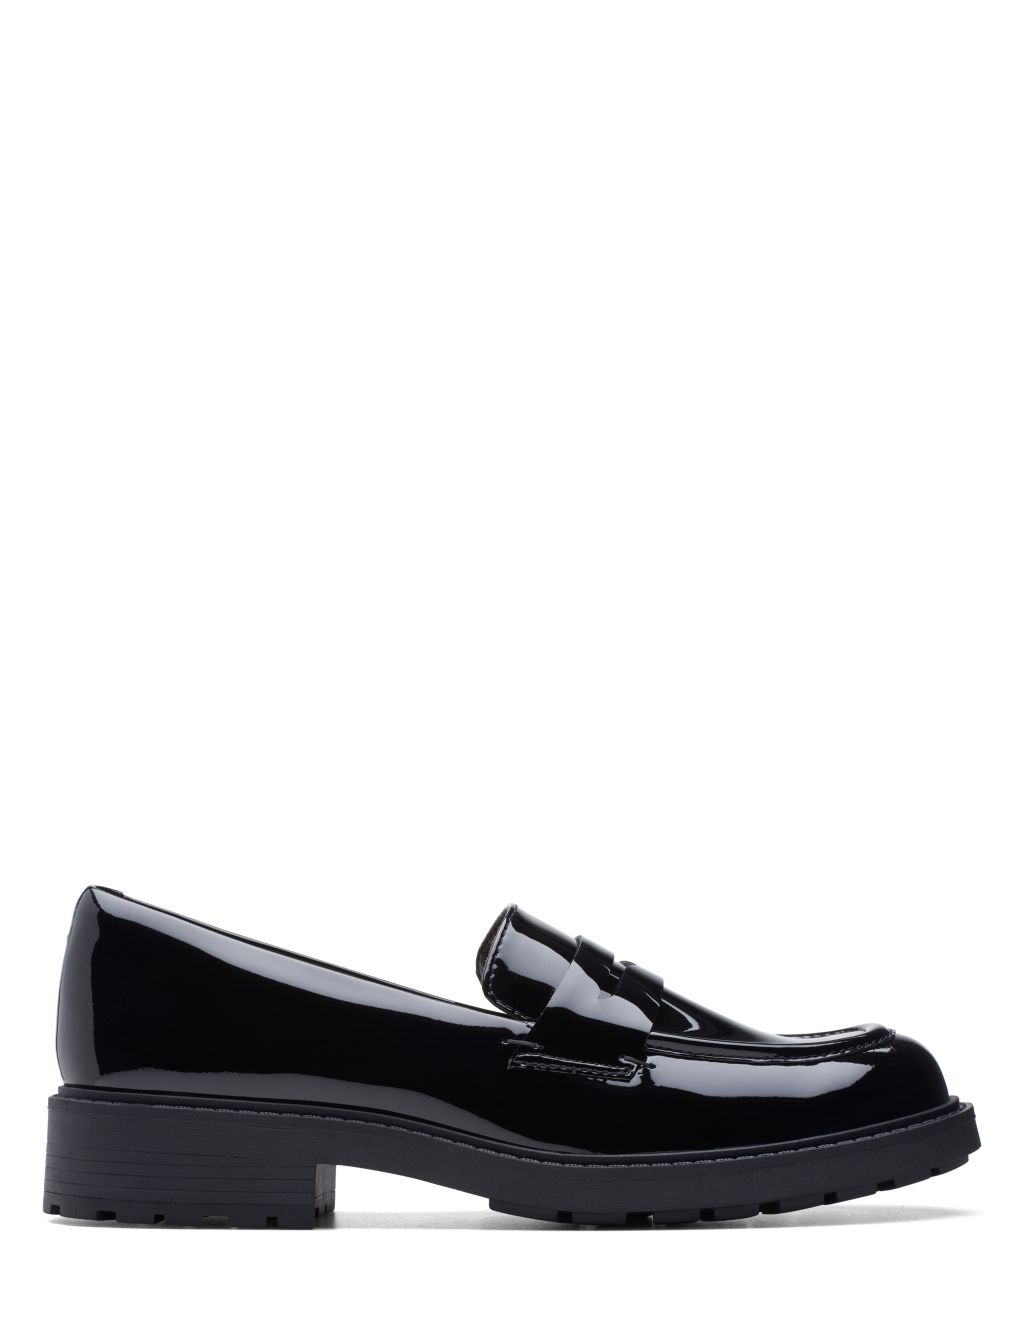 Leather Chunky Block Heel Loafers image 1